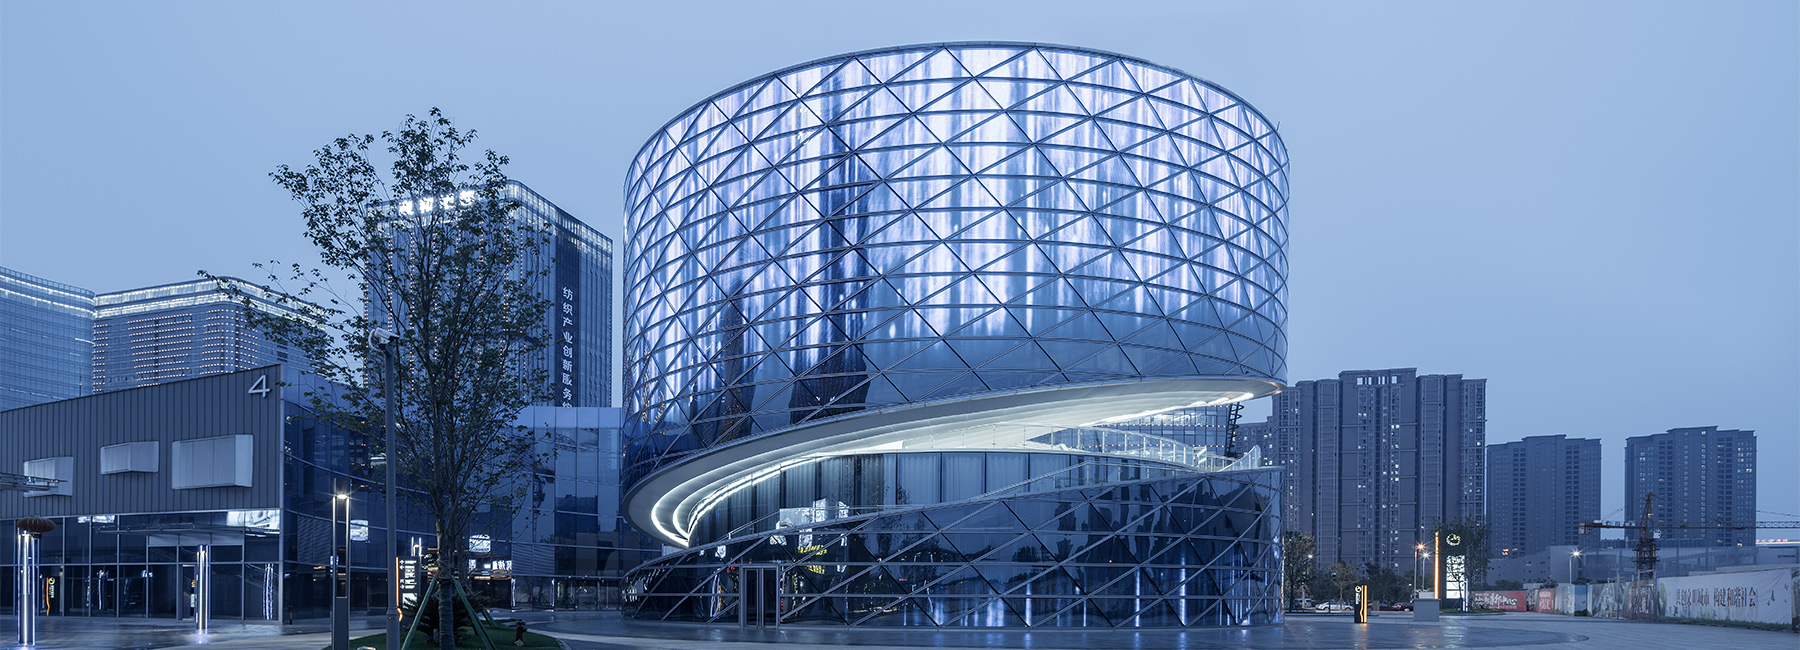 ATAH's spiral china textile center references woven fabric